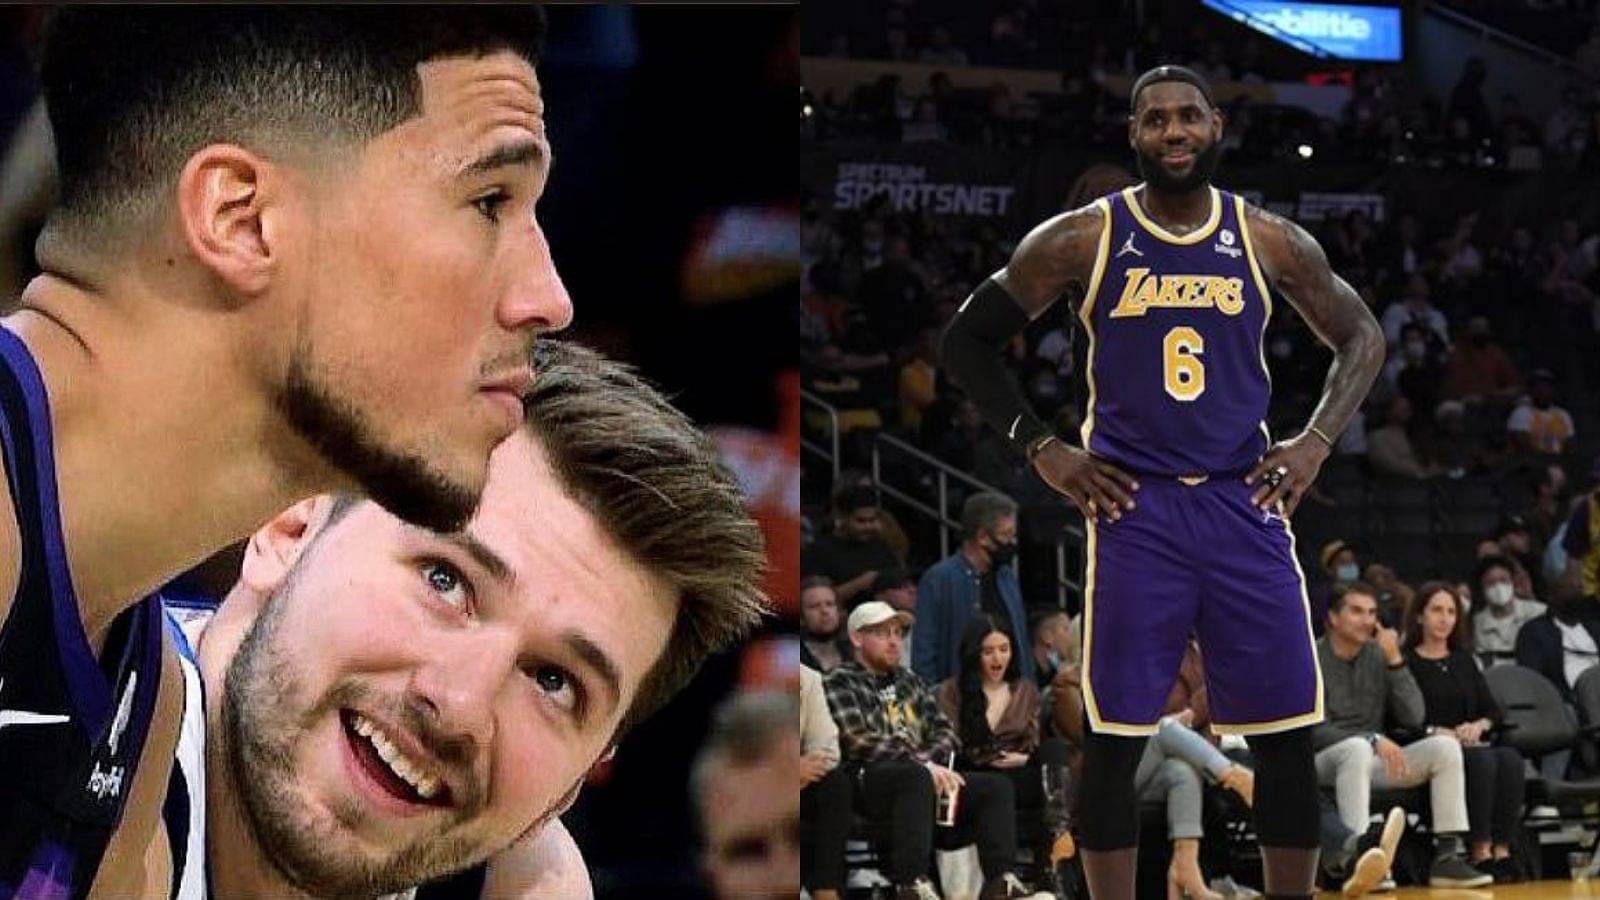 "LeBron James tried telling the Suns to stay humble": Chris Paul & Co mocked Luka Doncic and many others including Lakers star throughout the season, lived to see it all comeback